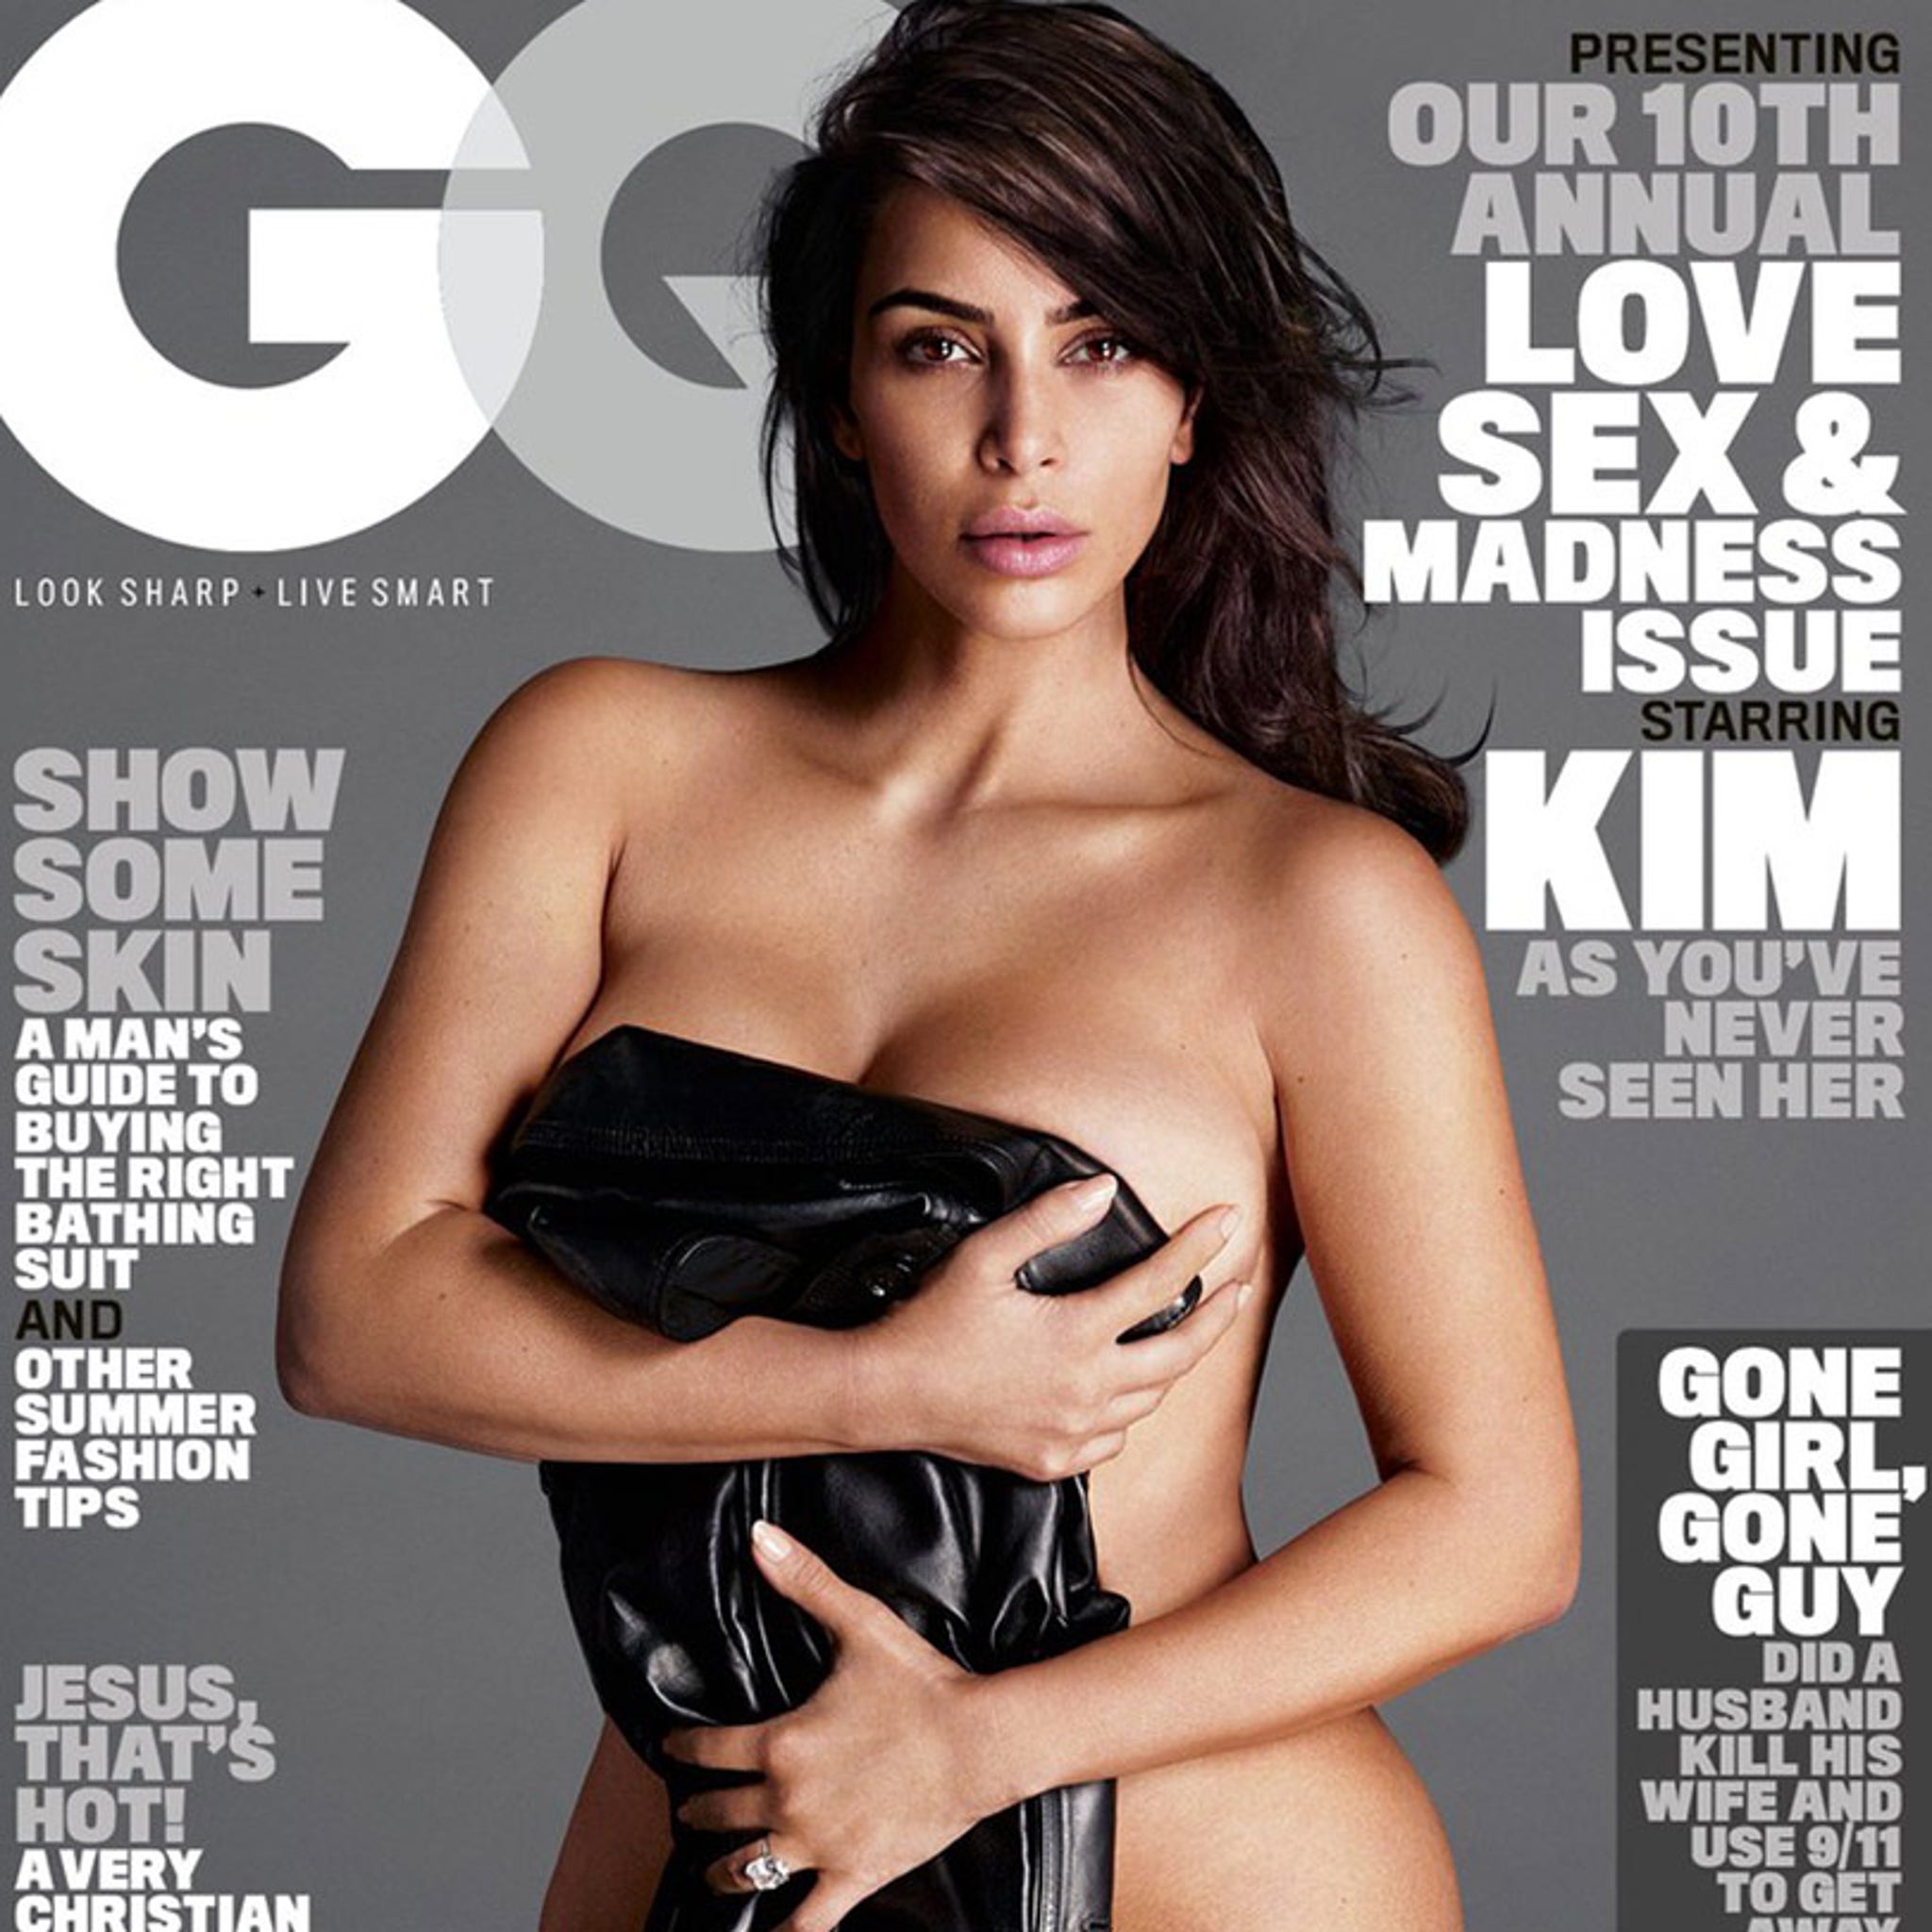 Kim Kardashian Covers GQ Completely Naked After Dropping 60lbs Of Baby Weight! image pic